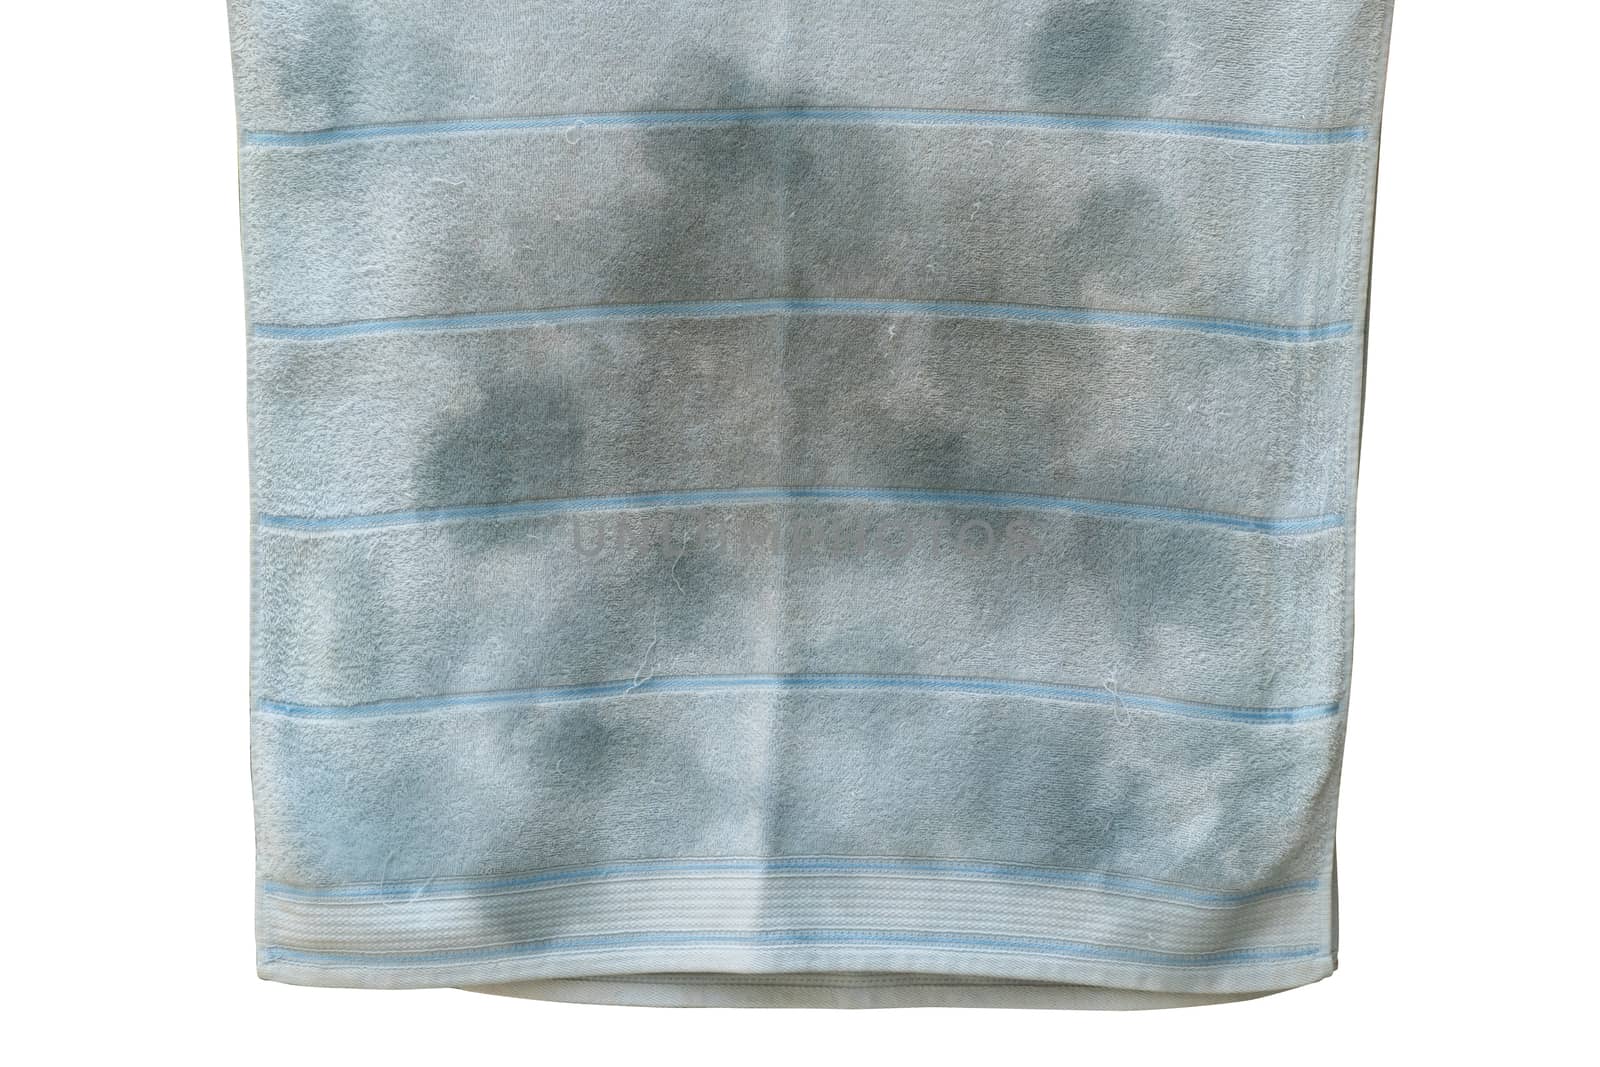 Old towel with stains on white background